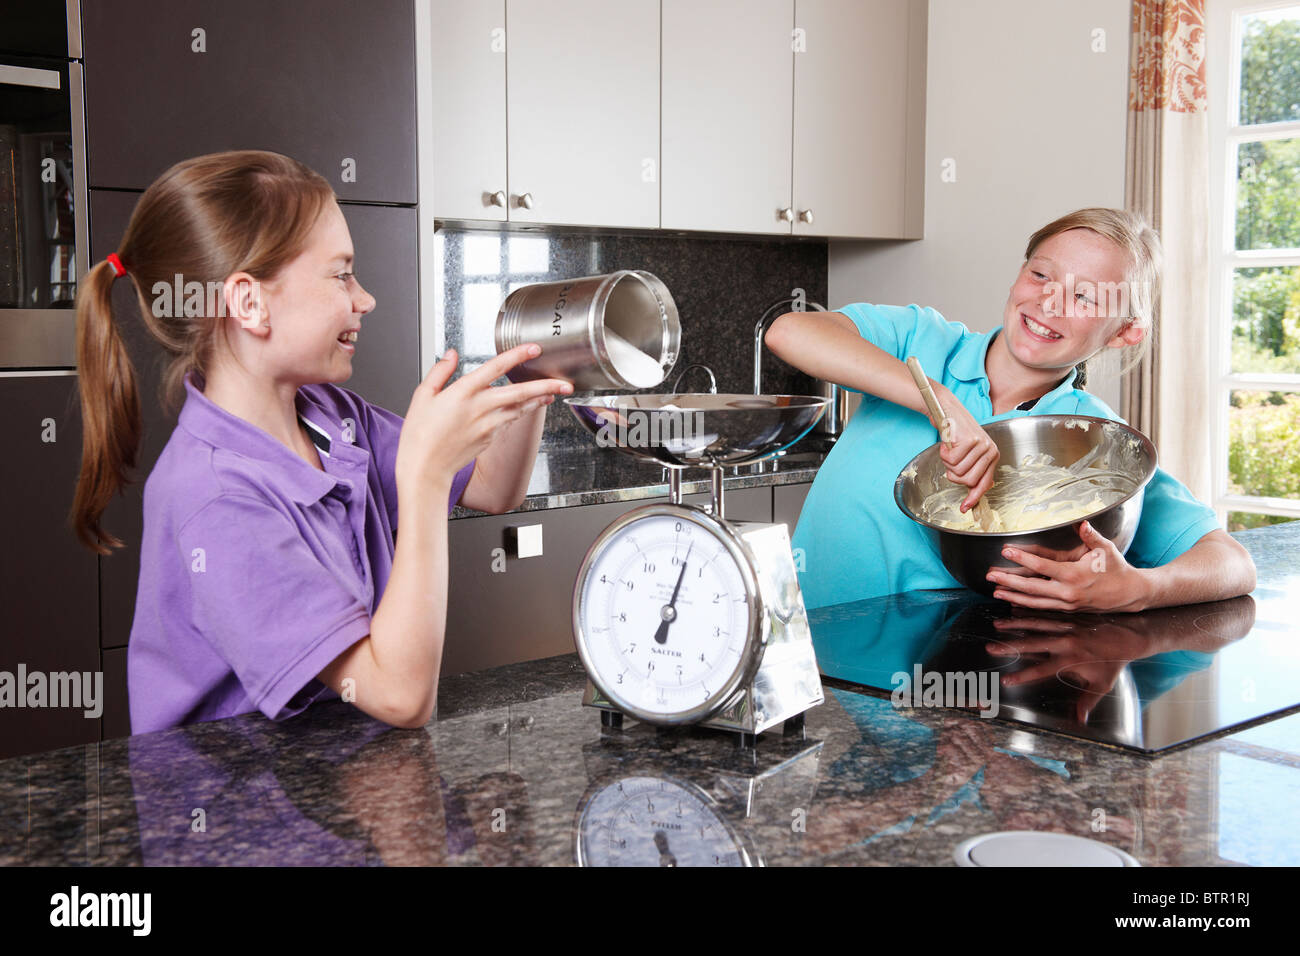 Girls cooking in the kitchen Stock Photo